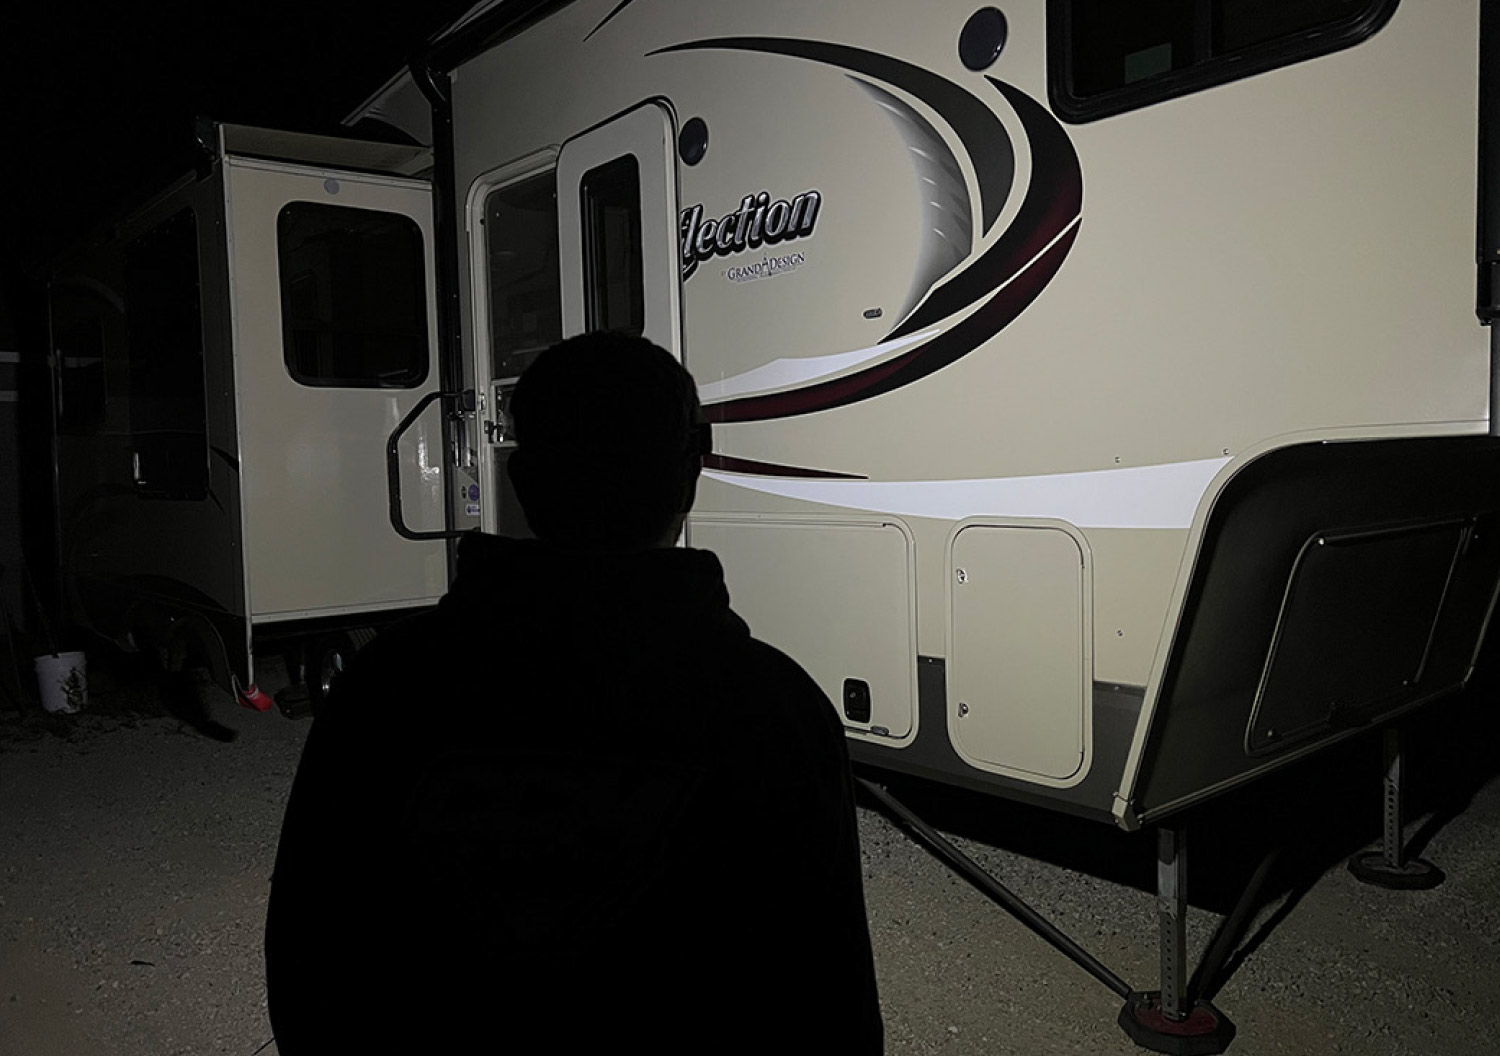 Silhouette standing in front of RV 